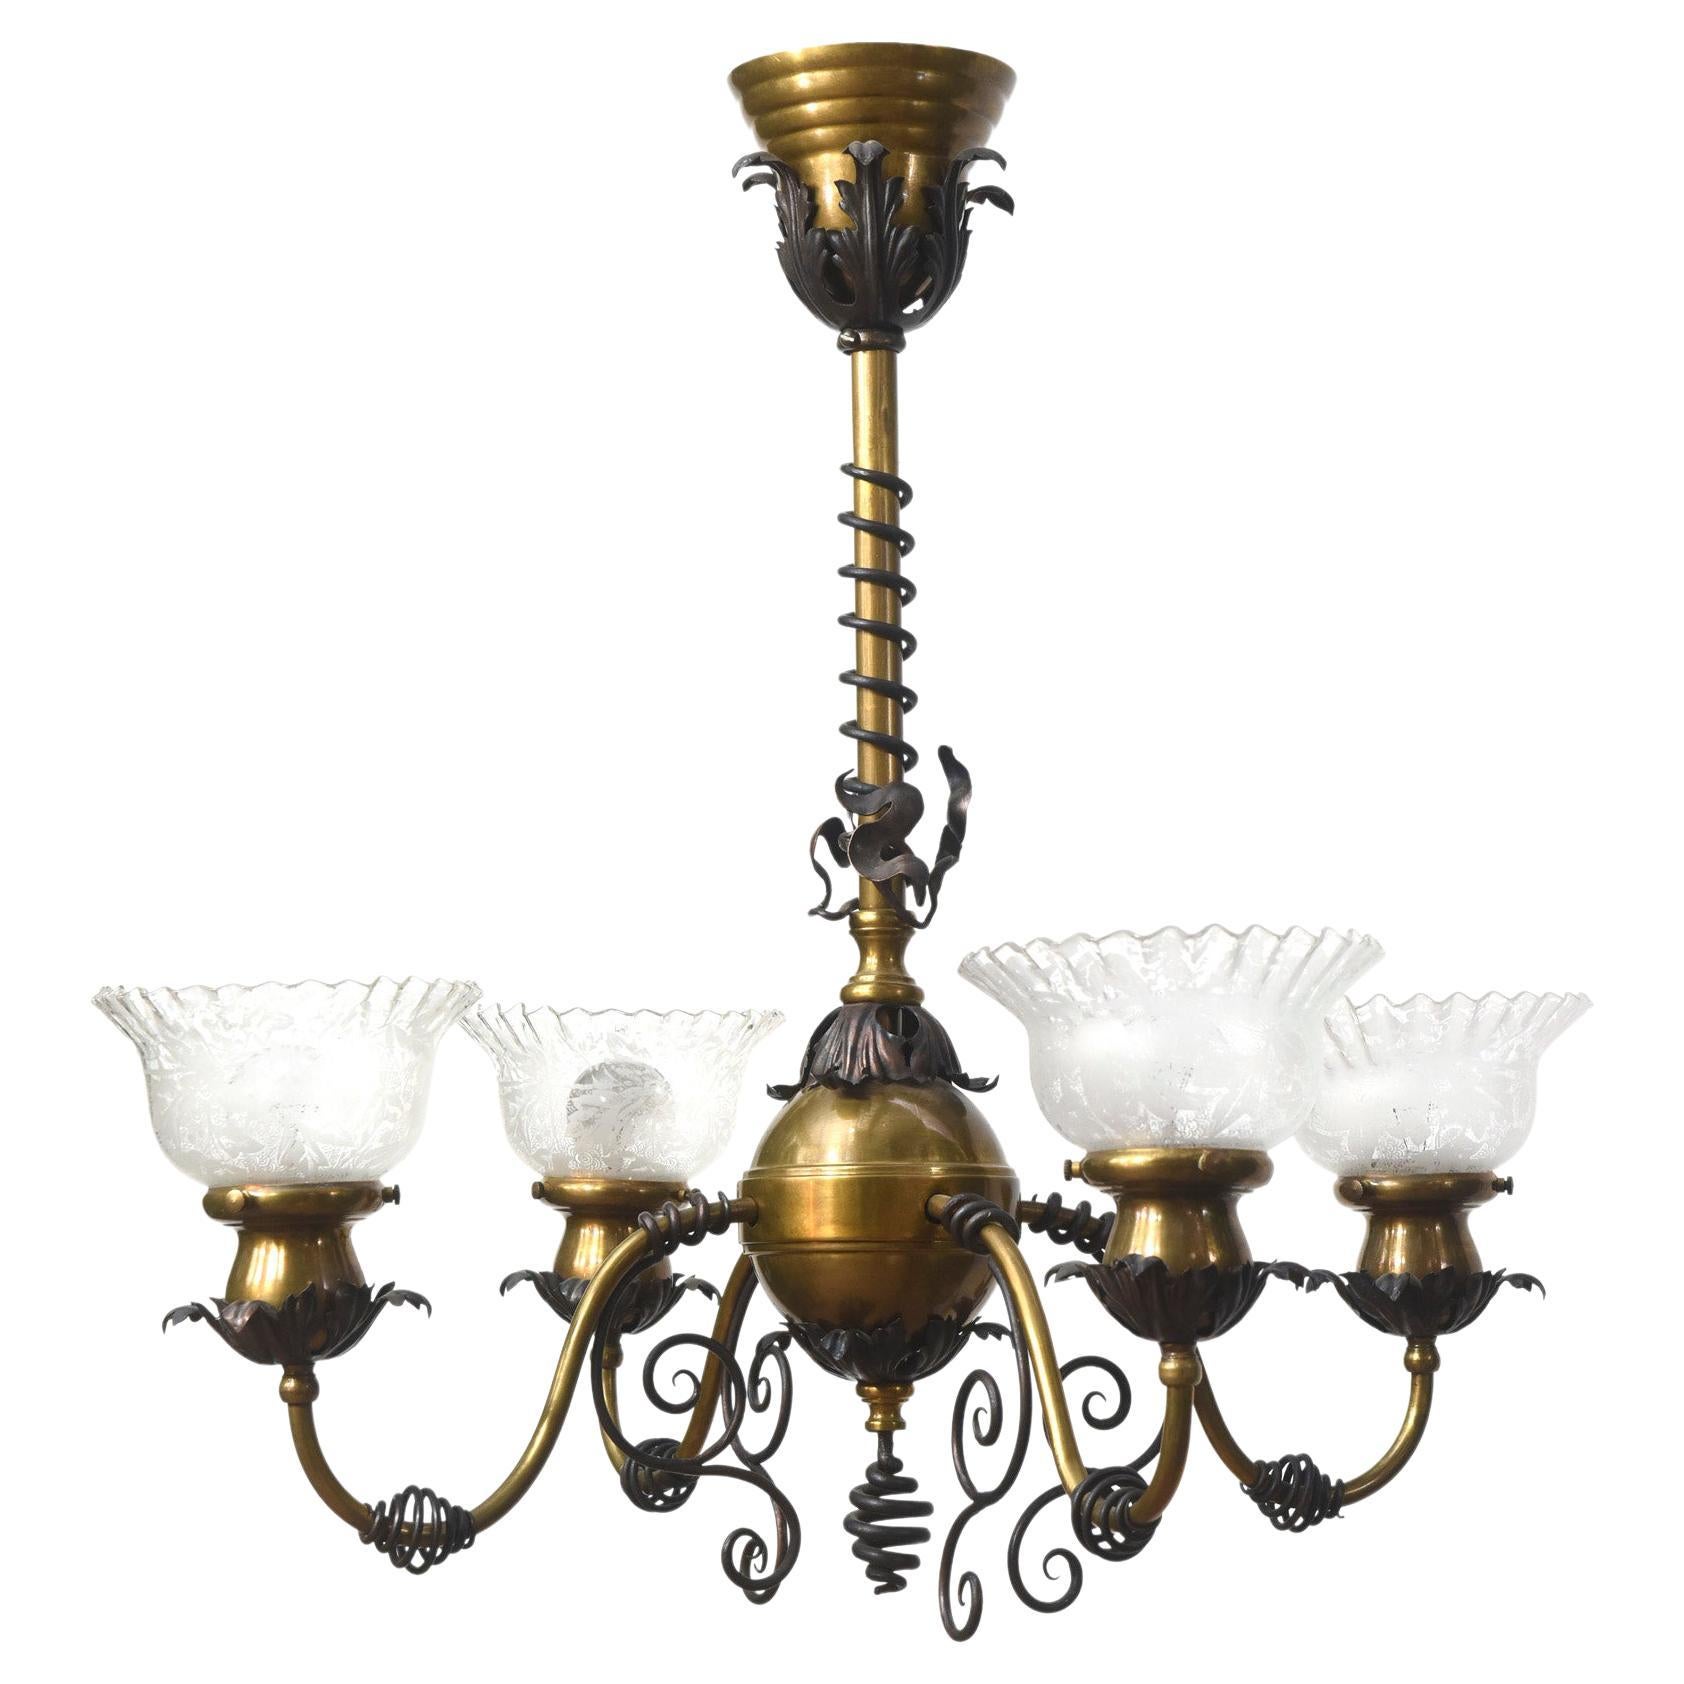 Four Light Brass and Wrought Iron Early Electric Fixture